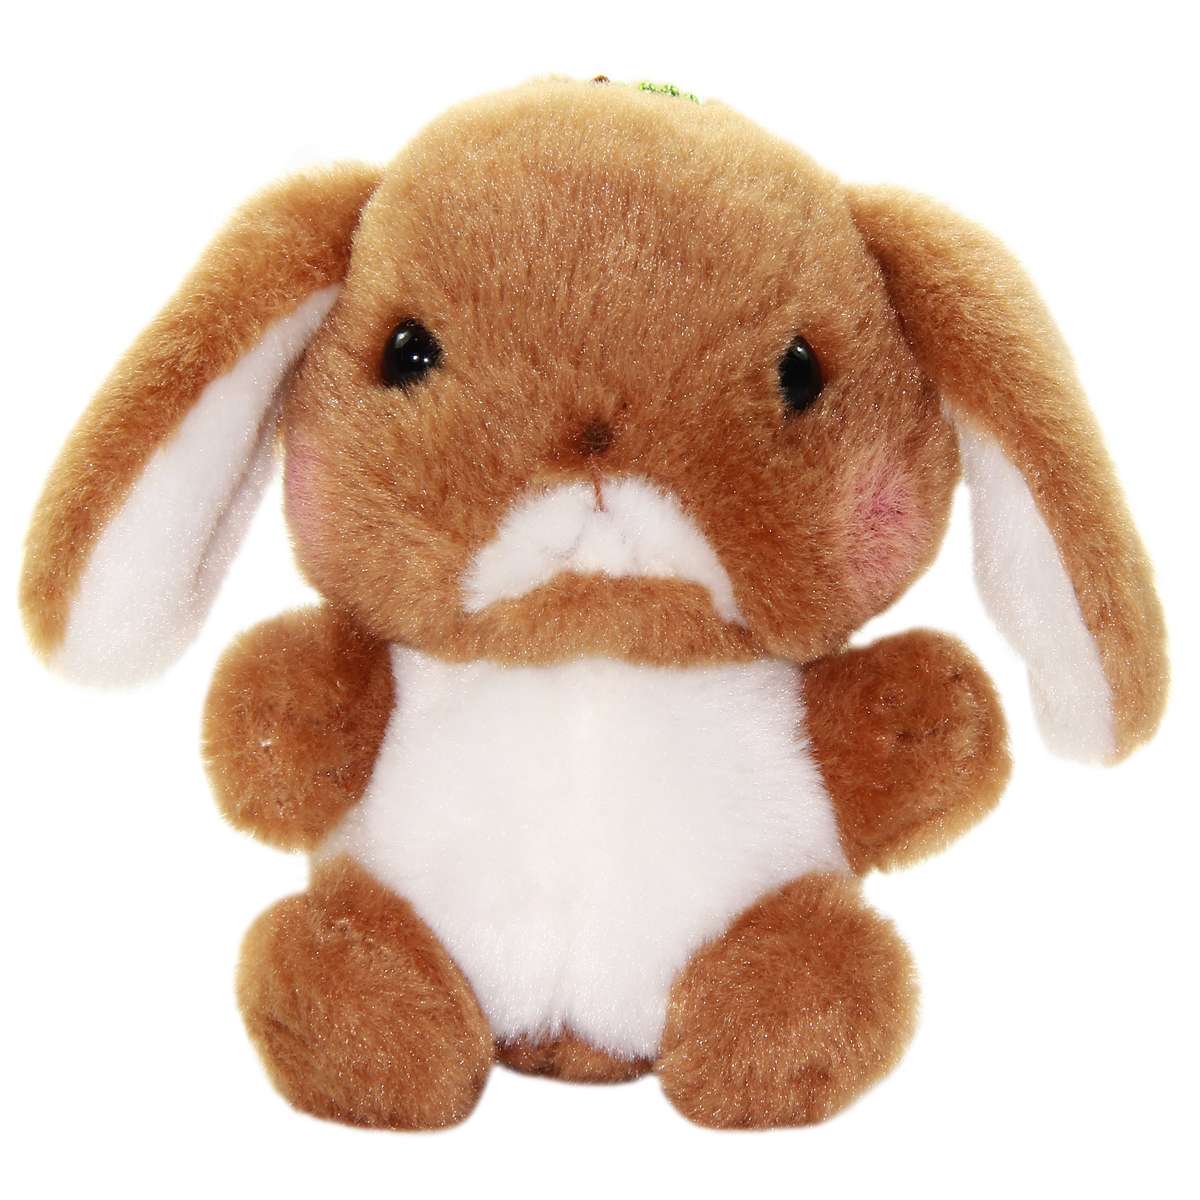 Amuse Bunny Plushie Cute Stuffed Animal Toy Brown 5 Inches